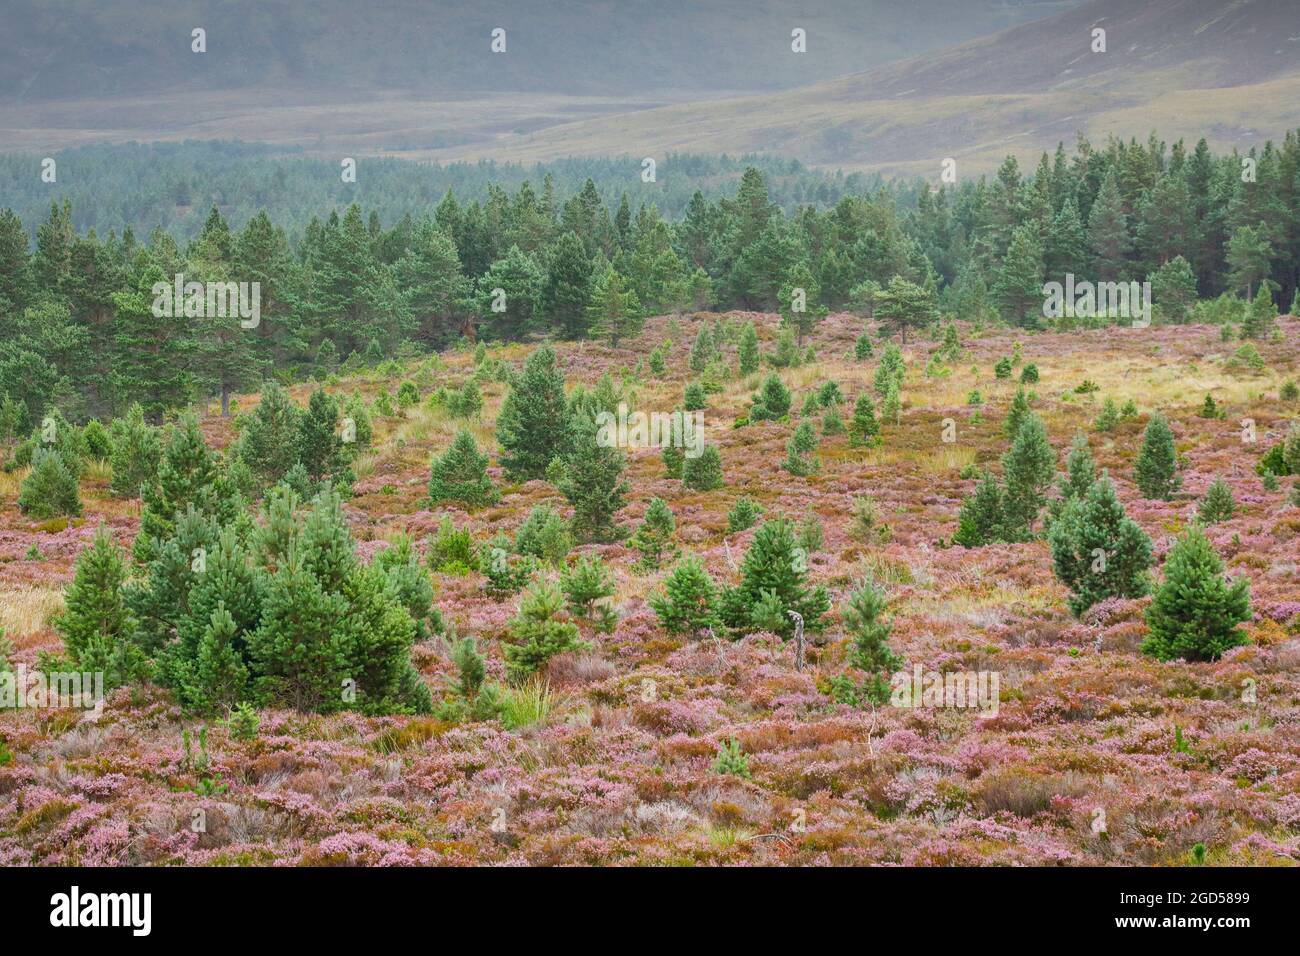 geography / travel, Great Britain, Scotland, Scots pine and heath, Cairngorms n. P., NO-EXCLUSIVE-USE FOR FOLDING-CARD-GREETING-CARD-POSTCARD-USE Stock Photo